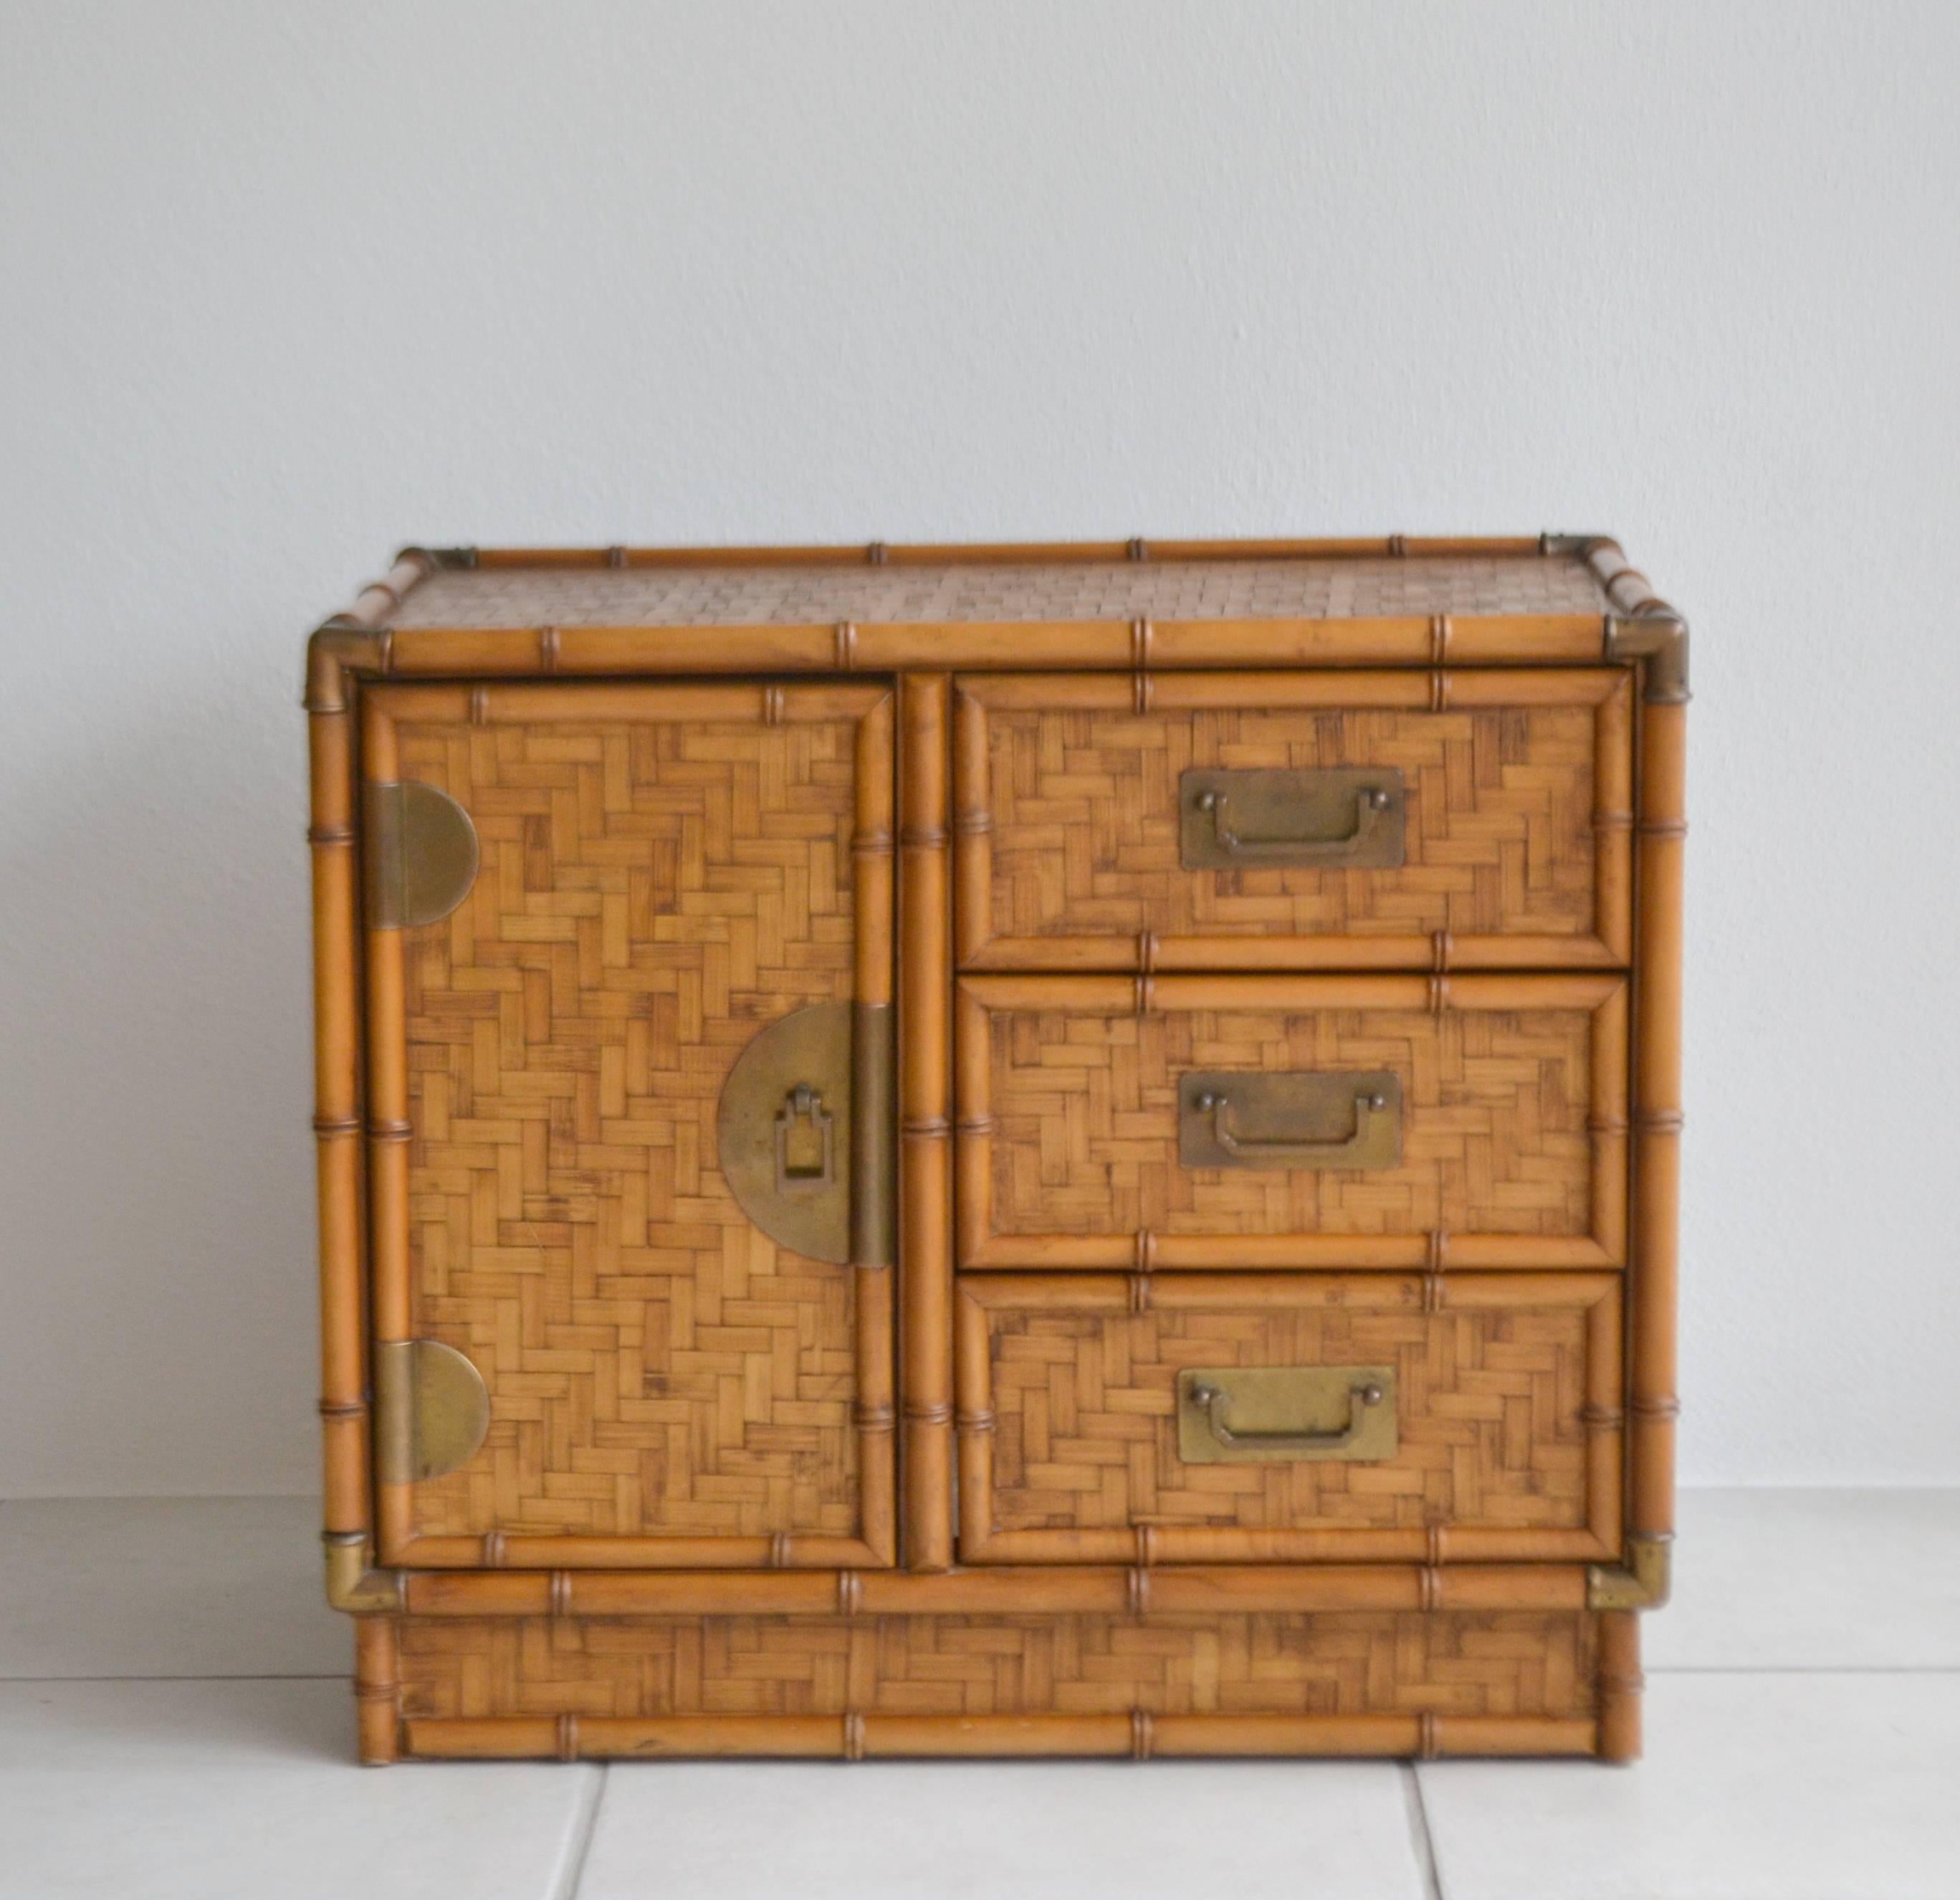 Striking pair of Mid-Century woven reed nightstands or side cabinets, circa 1960s. These stunning side tables or end tables have been artisan crafted in the form of Campaign style chests with faux bamboo detailing and accented with patinated brass